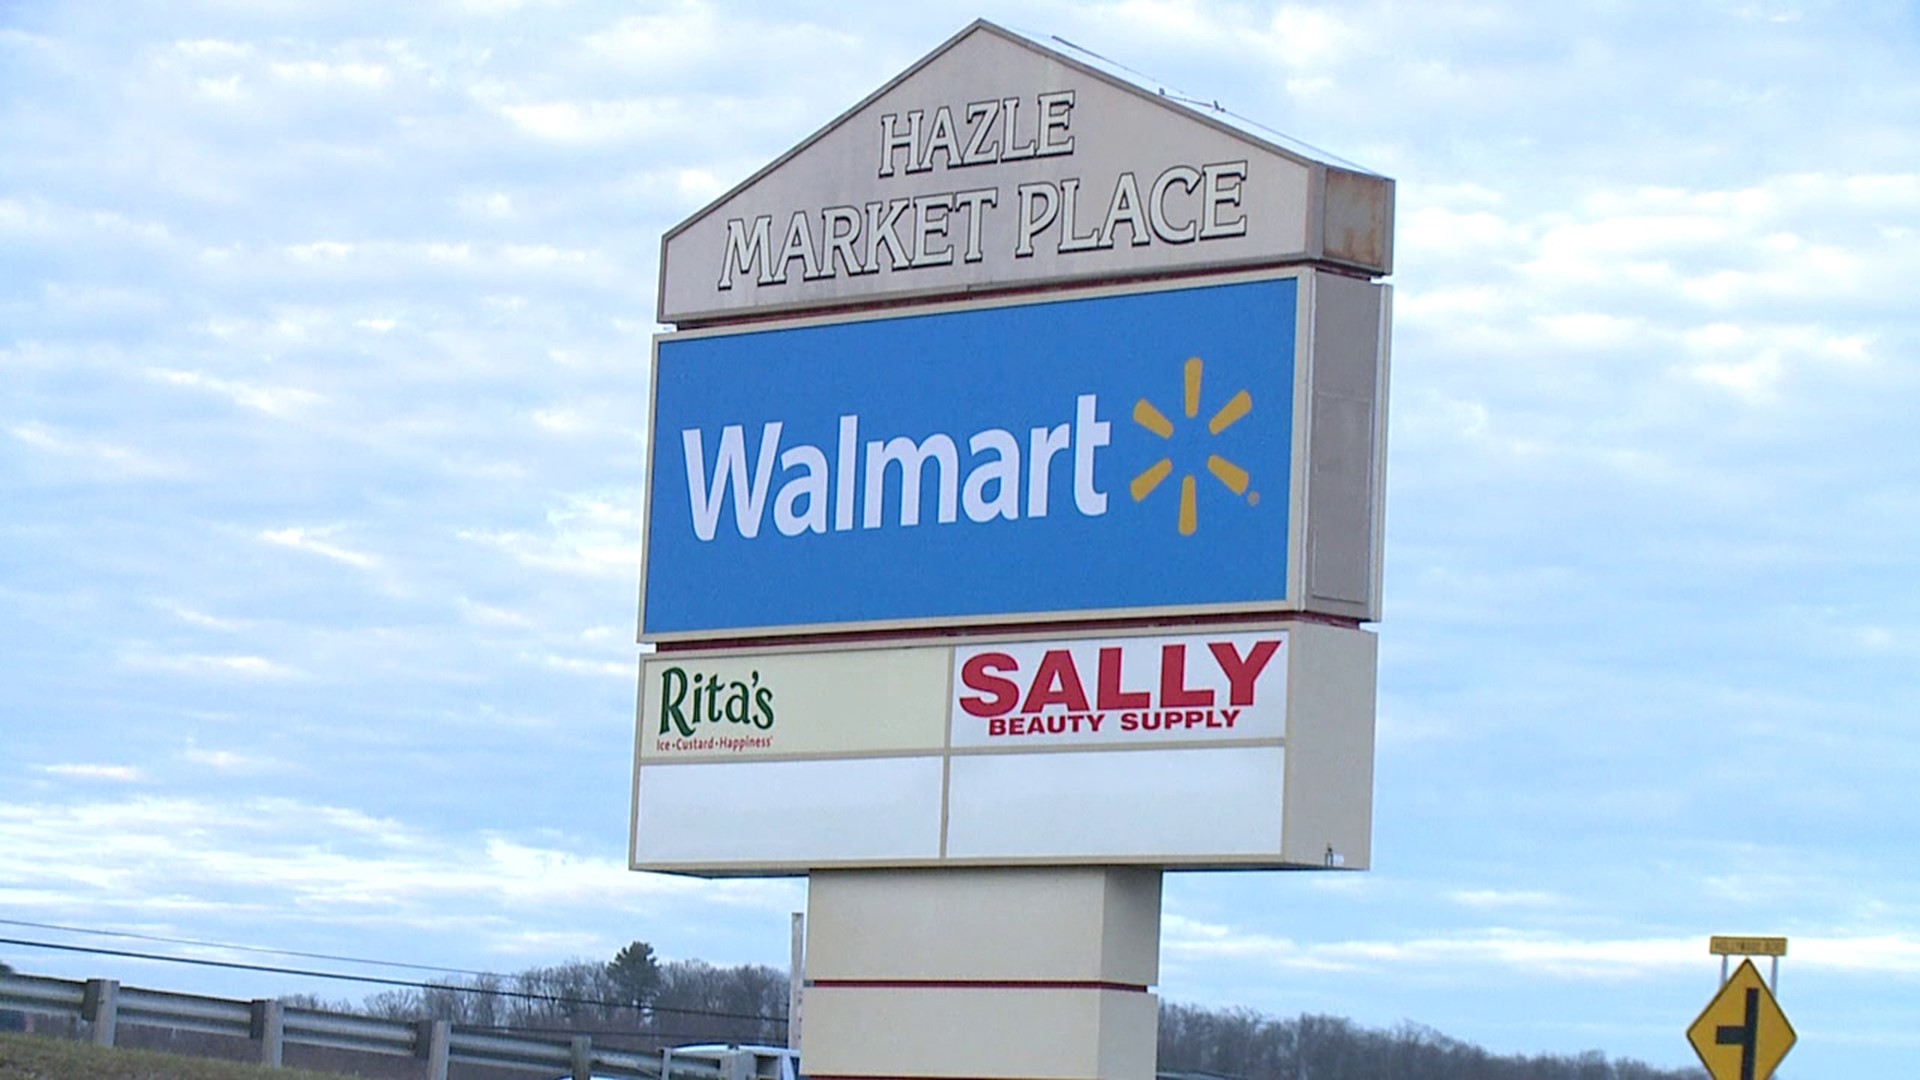 Two teenagers are among the three people charged after shots were fired in a Walmart parking lot.